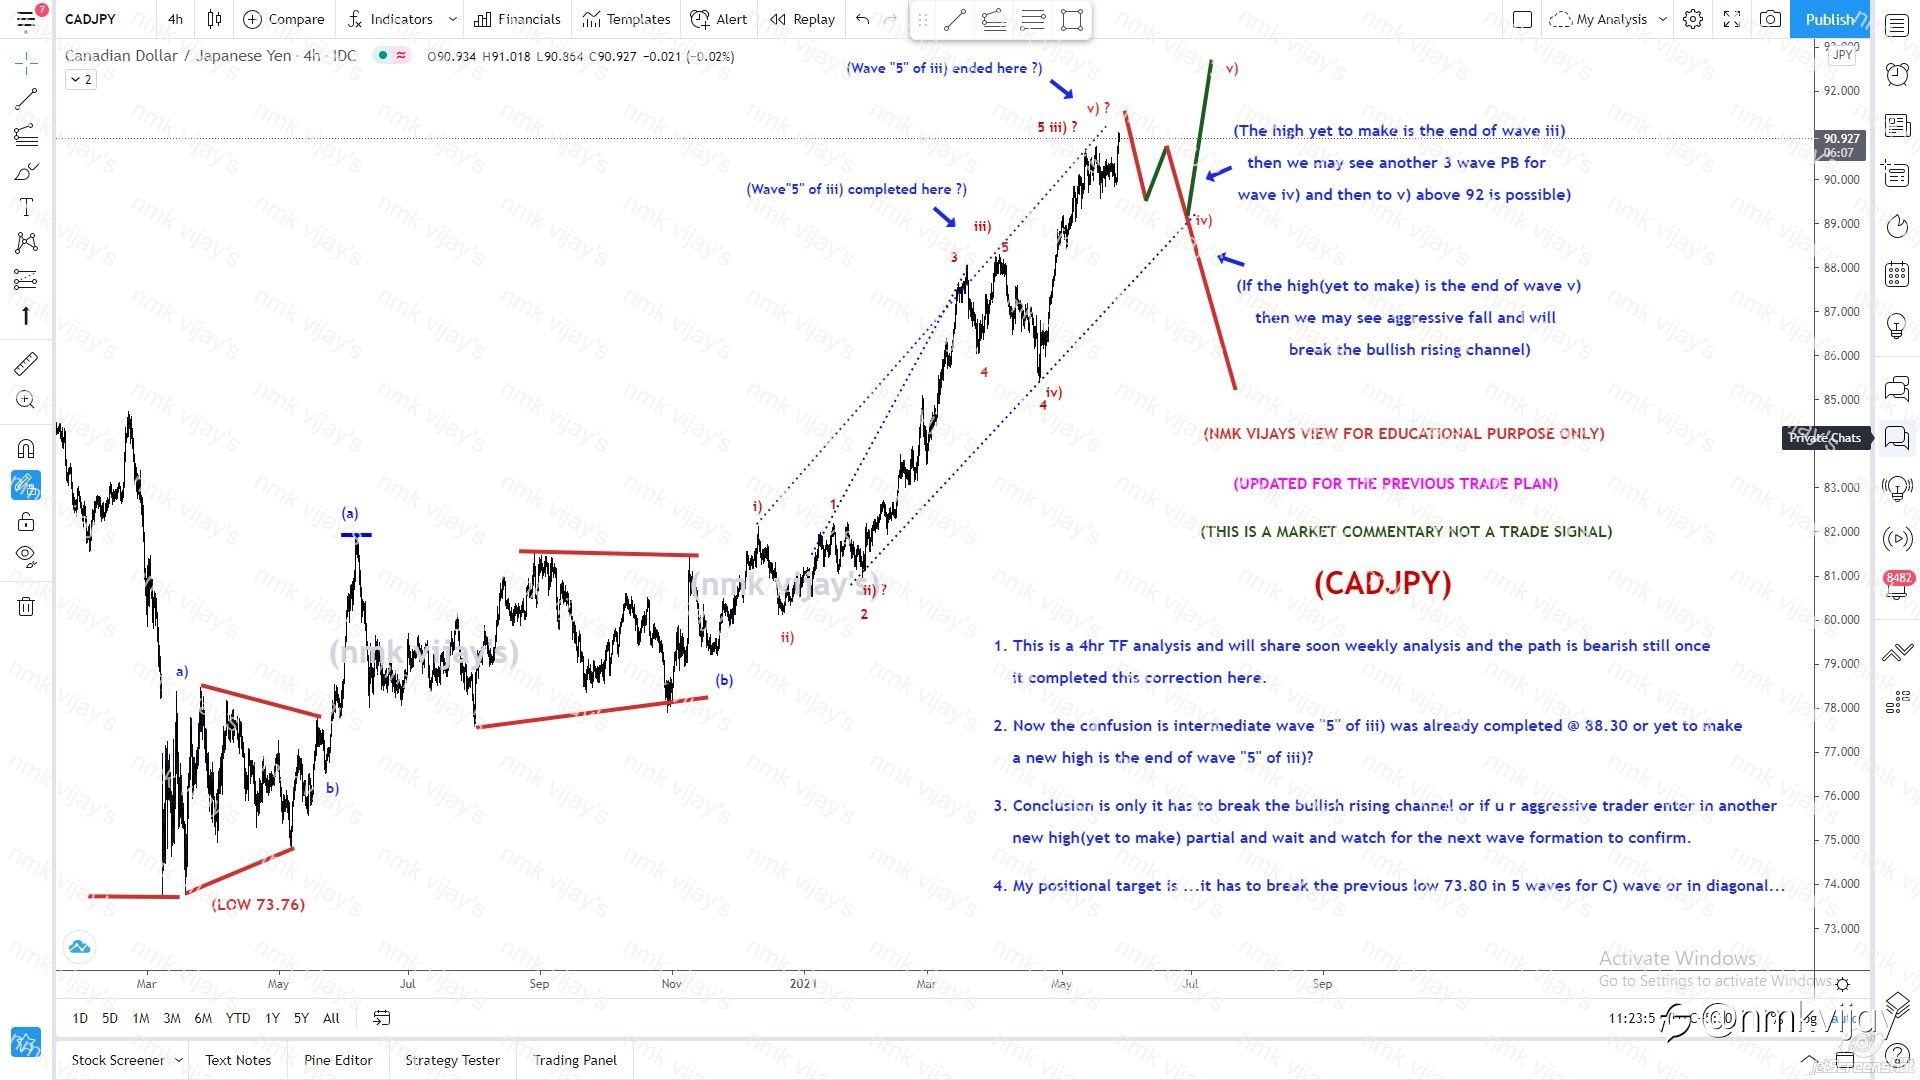 CADJPY-Looking for a drop but from here or above 92?